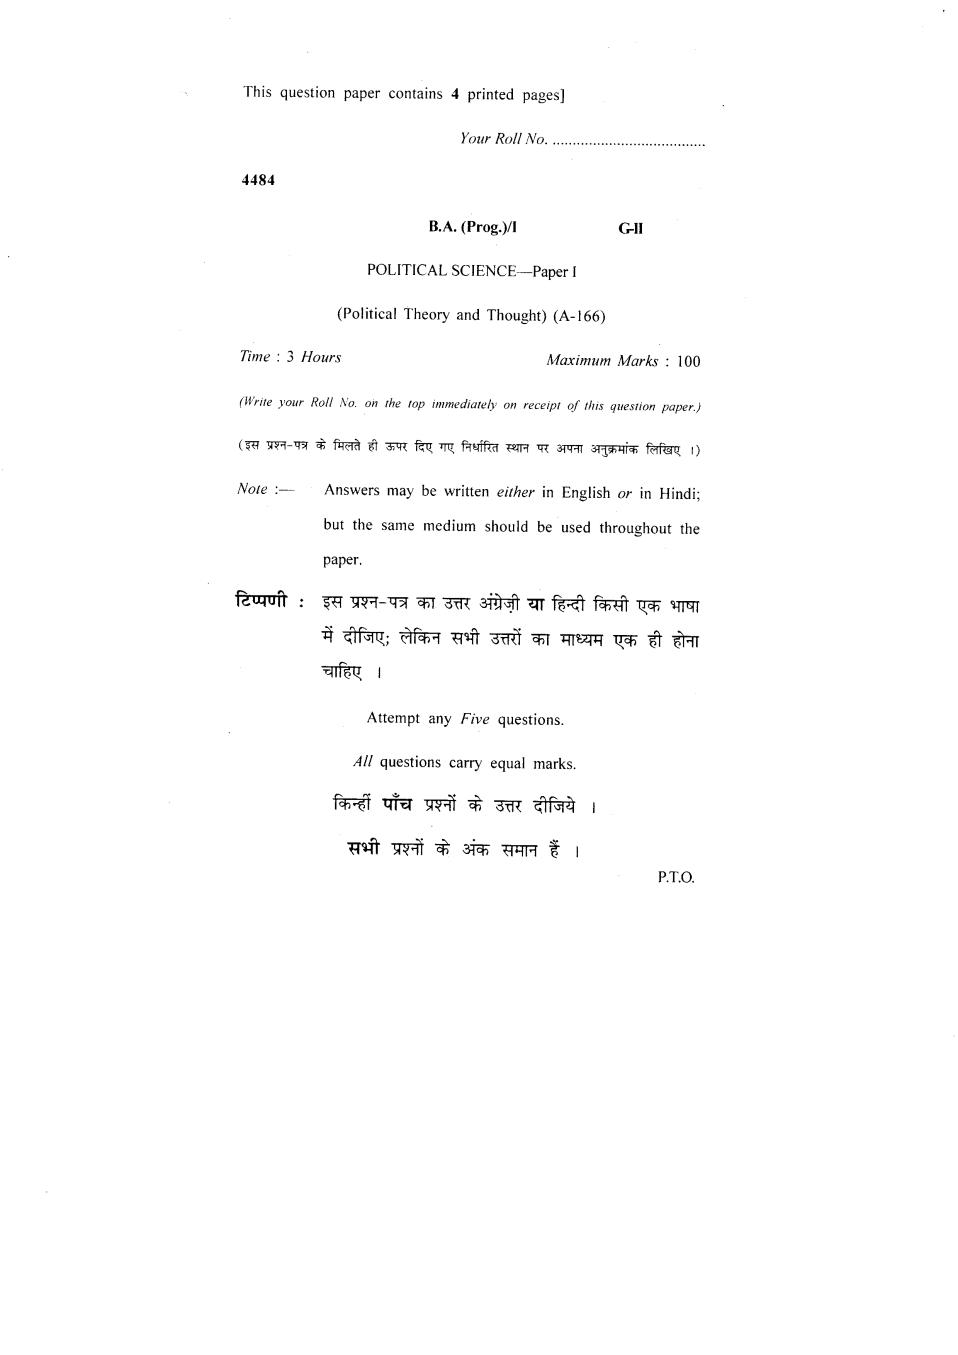 DU SOL Question Paper 2018 BA Political Science - Political Theory and Thought - Page 1